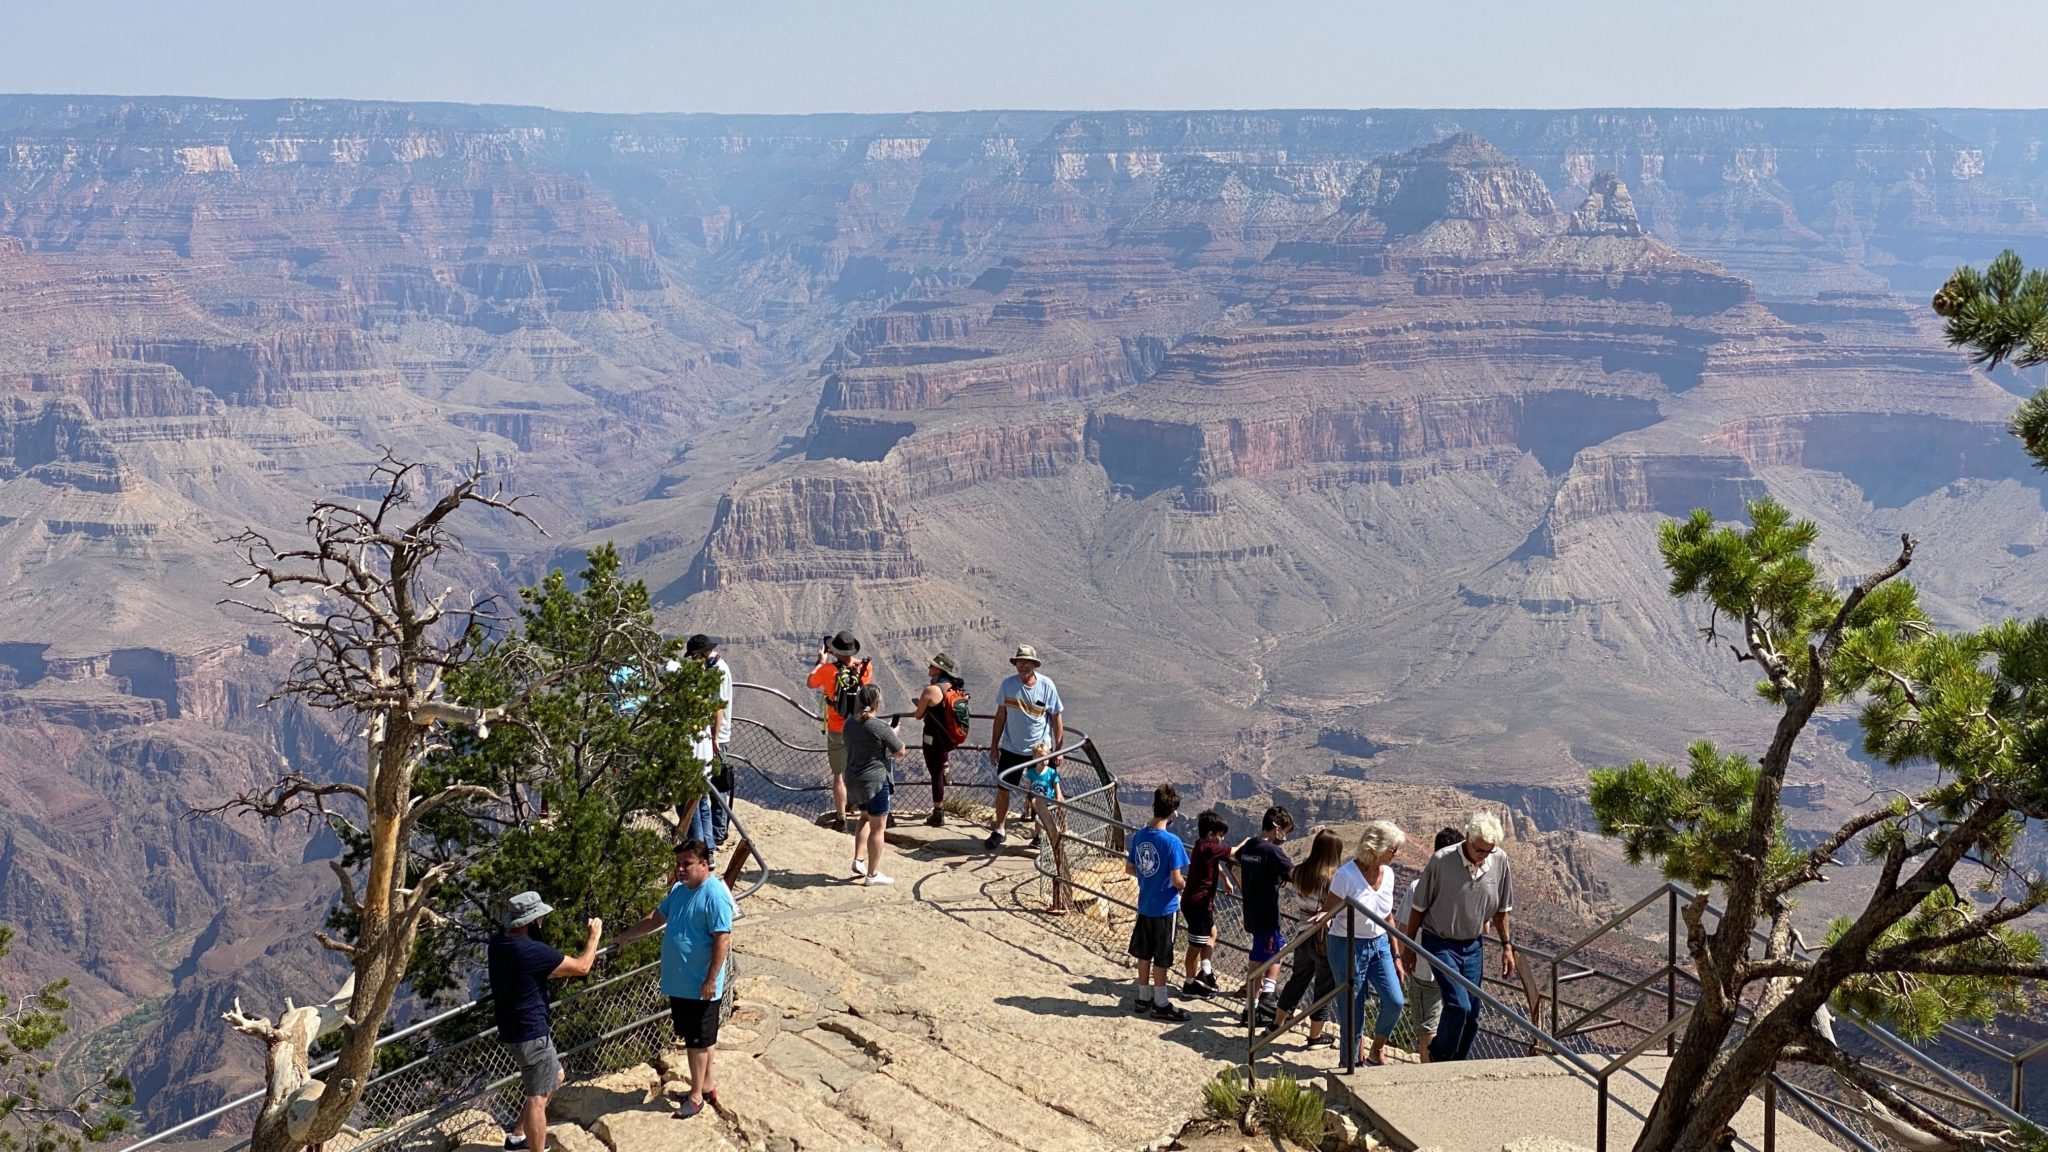 Woman Dies In Flash Flood At Grand Canyon | The Daily Caller